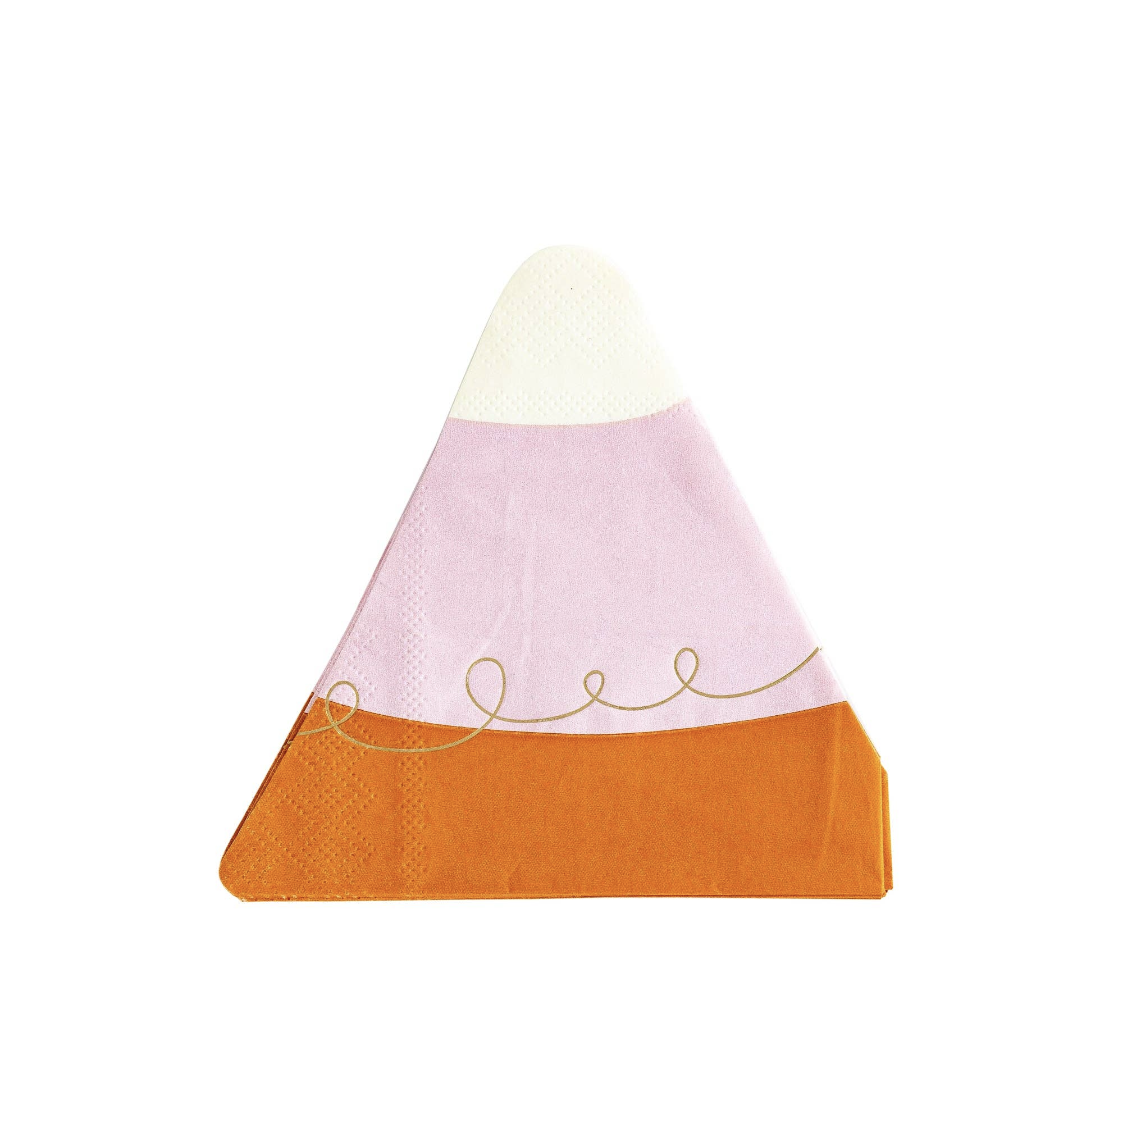 Candy Corn Shaped Cocktail Napkins